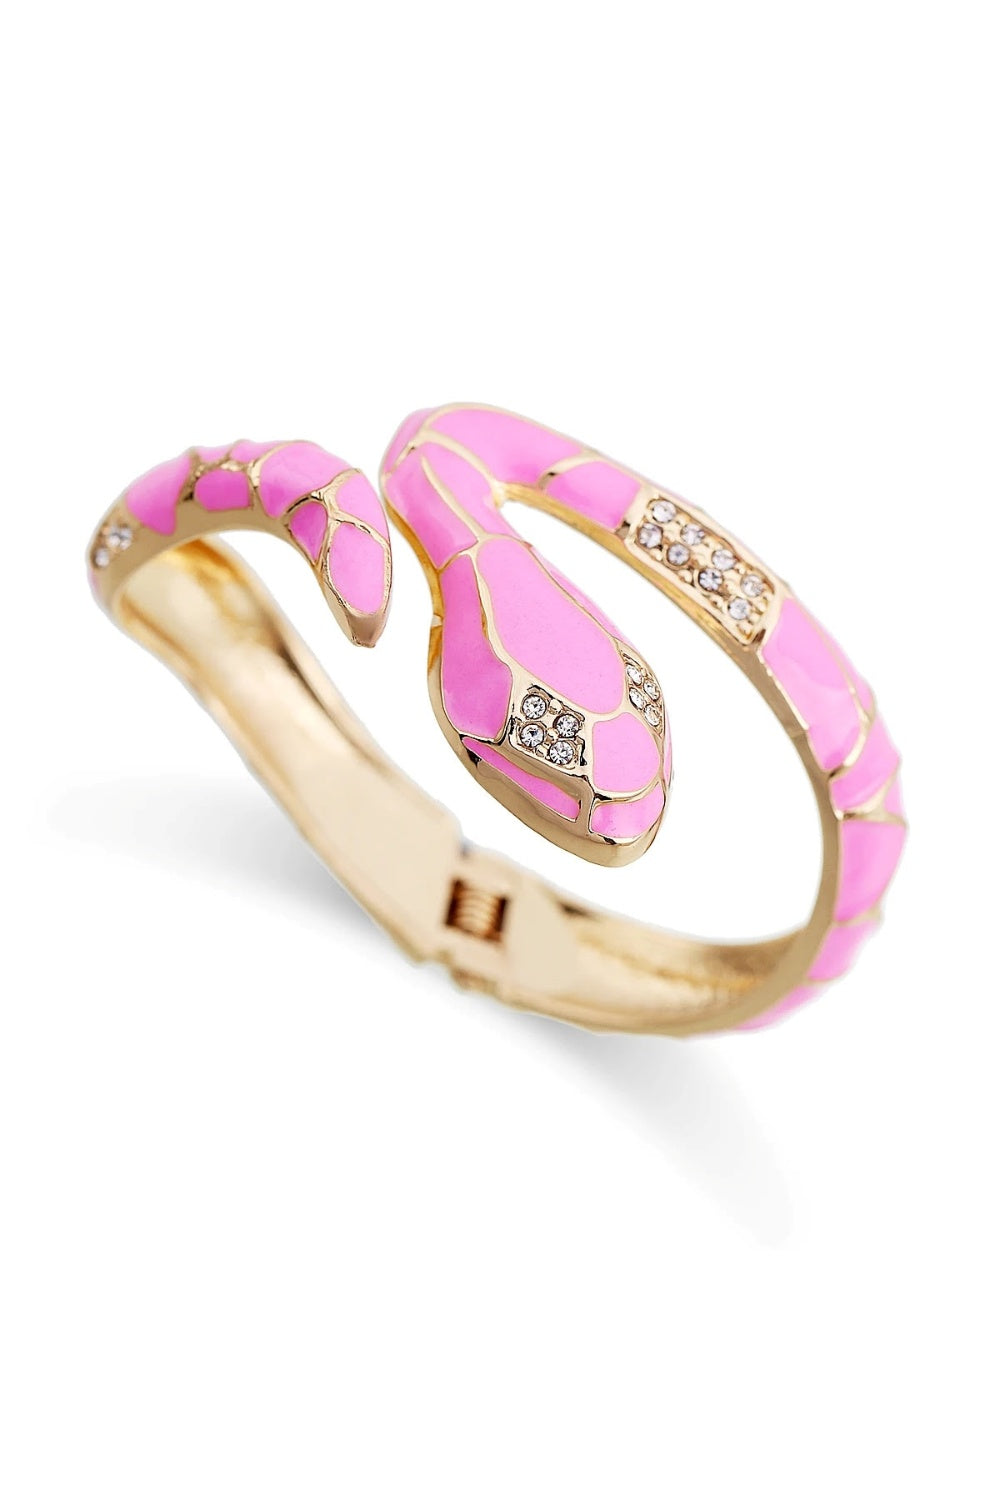 SNAKES & LADDERS BANGLE PINK